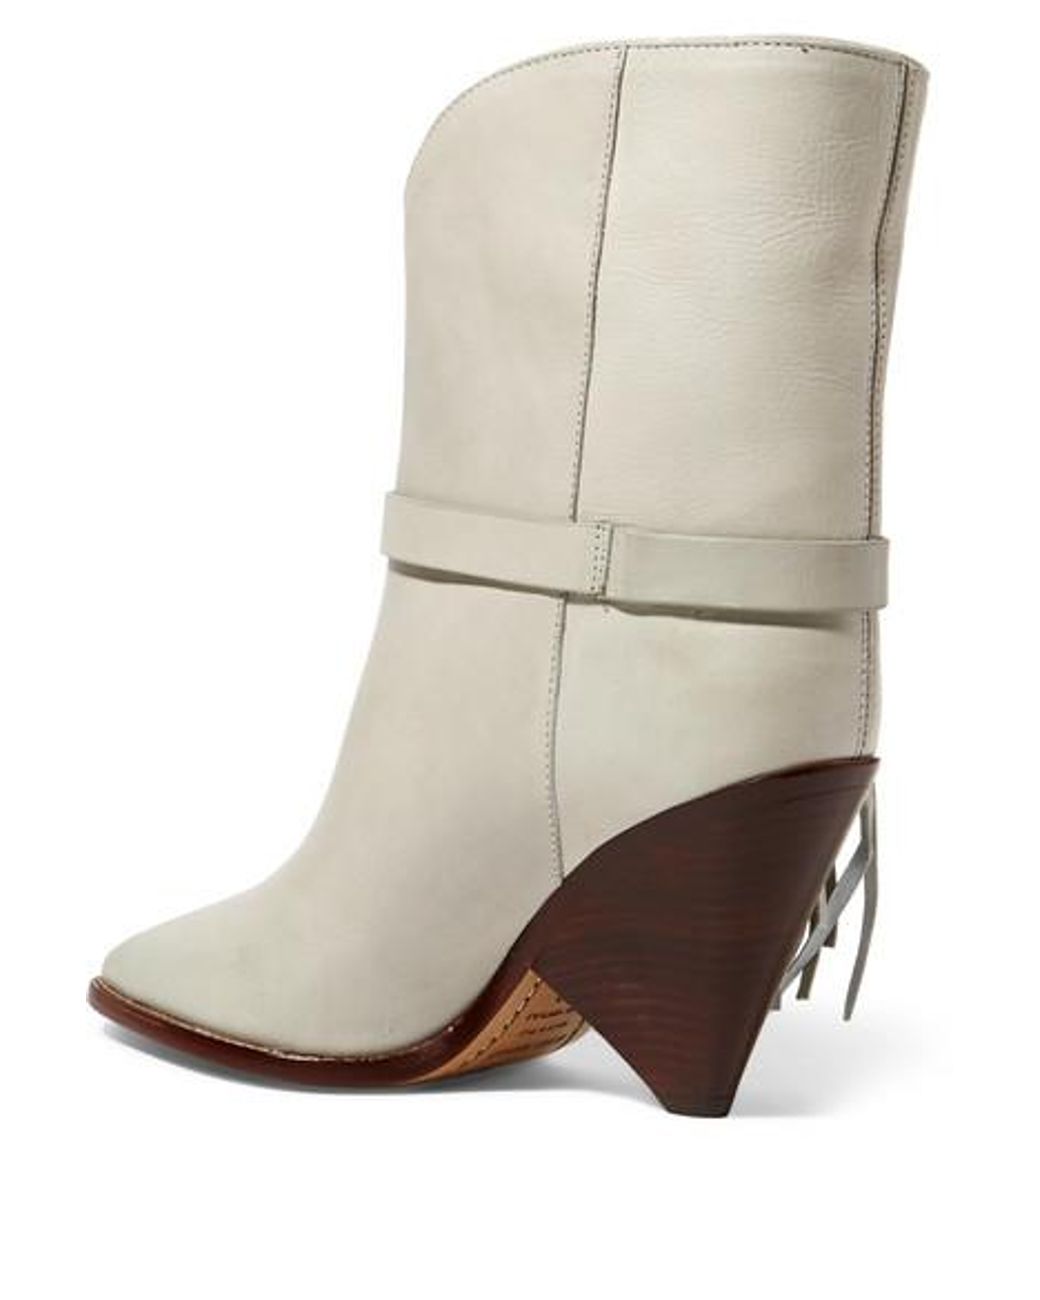 ISABEL MARANT Donatee Studded Leather Ankle Boots - Farfetch